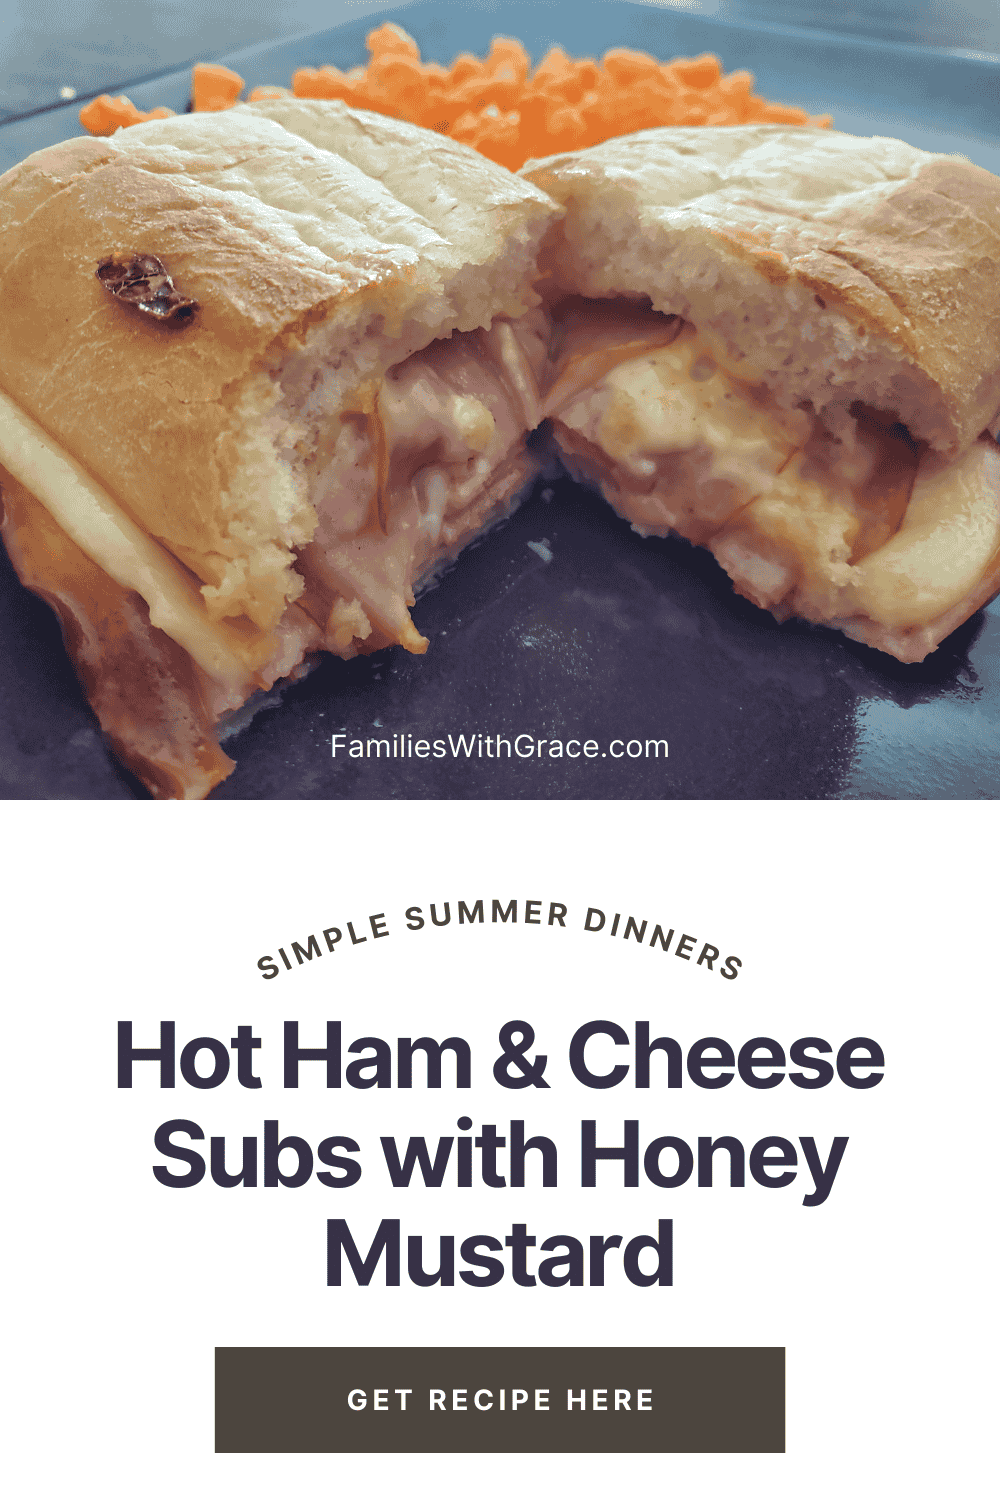 Hot ham and cheese subs with honey mustard